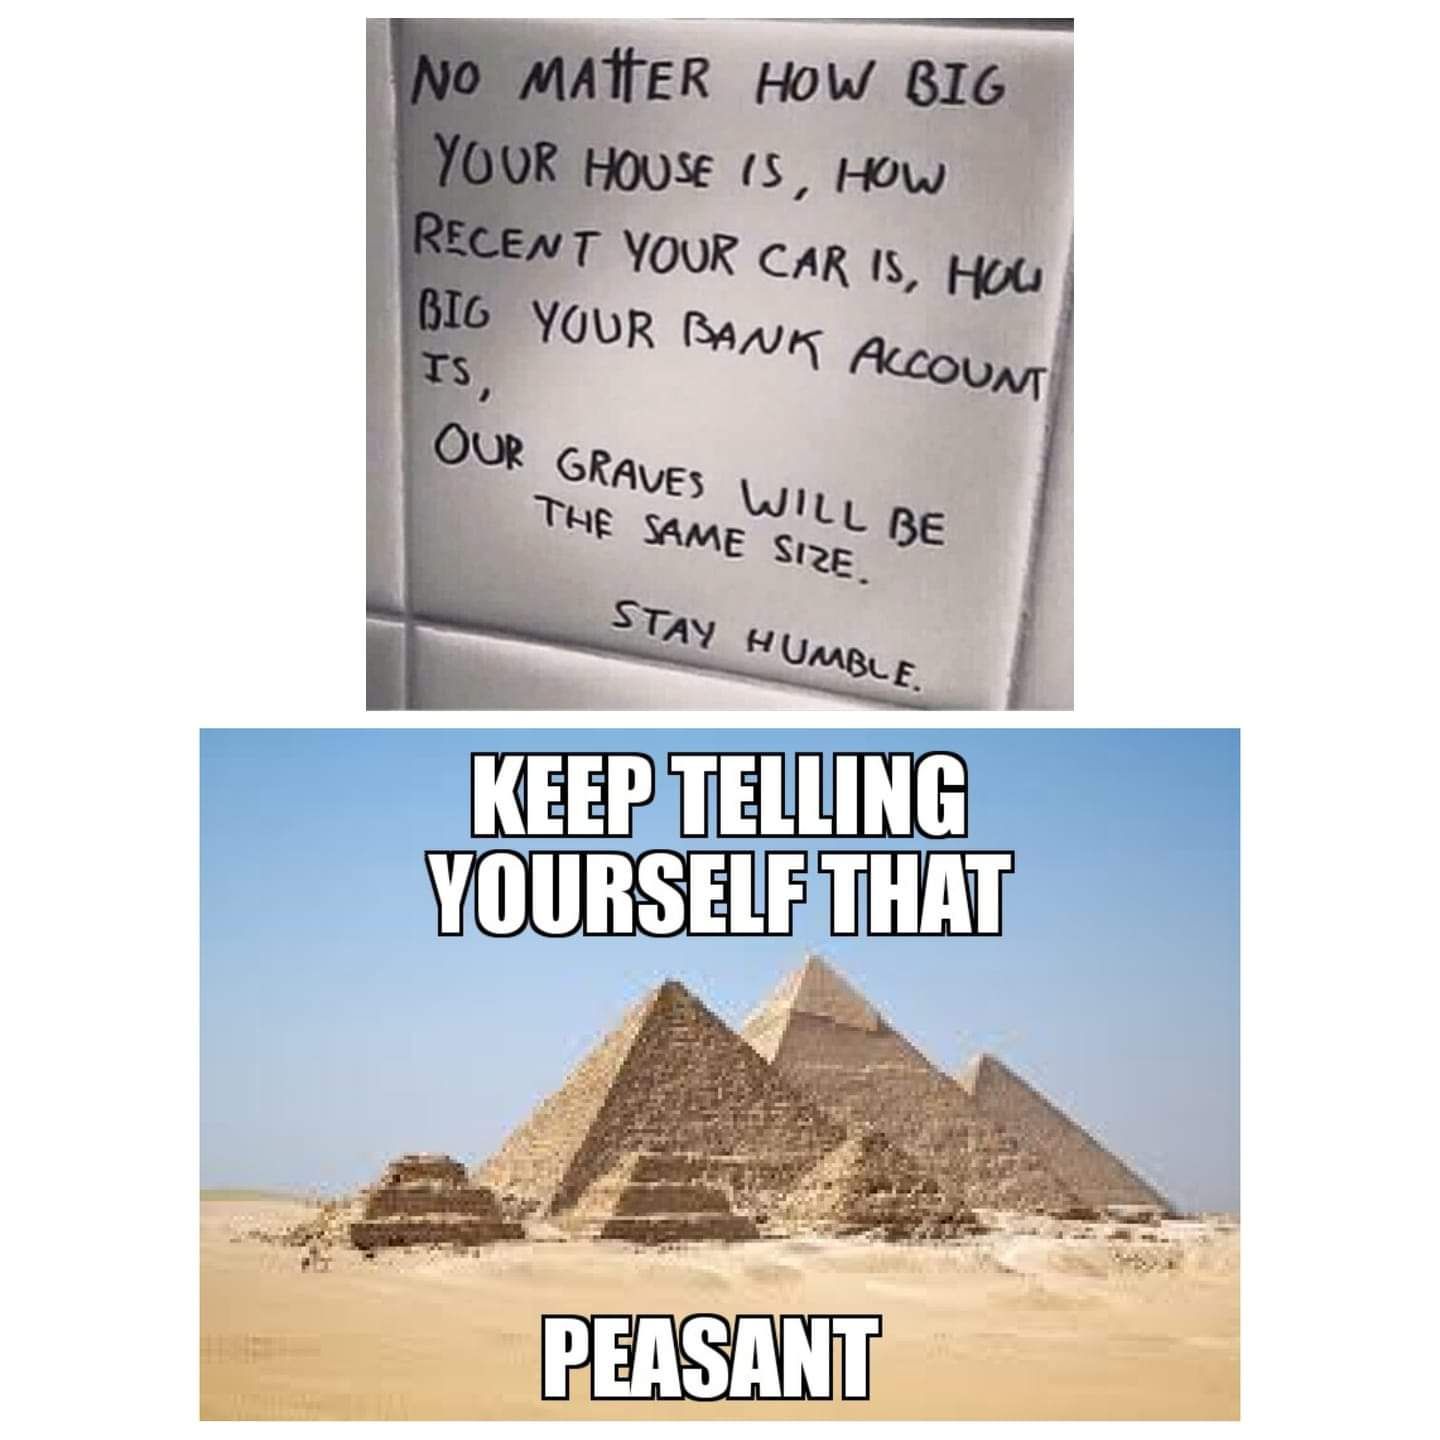 *laughs in hieroglyph*